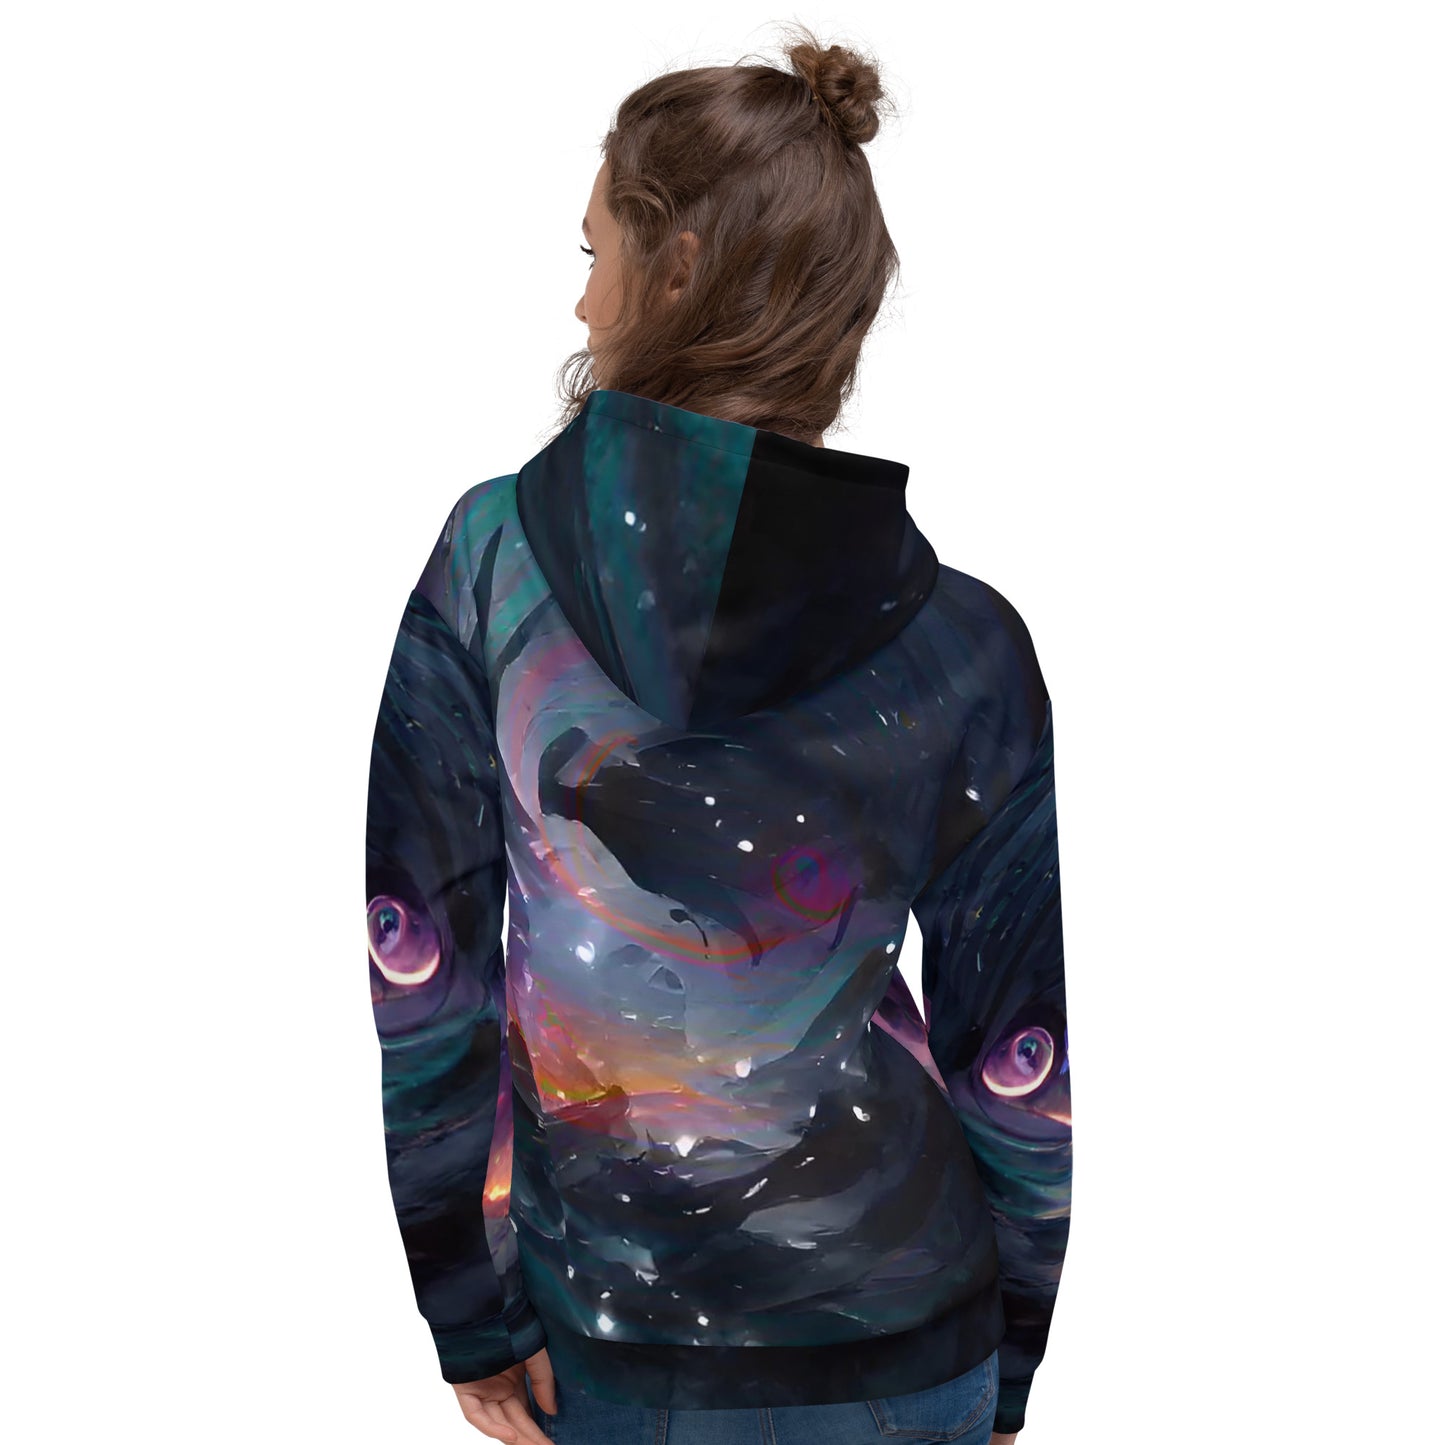 PARALLEL WORLDS (Unisex All Over Print Hoodie)